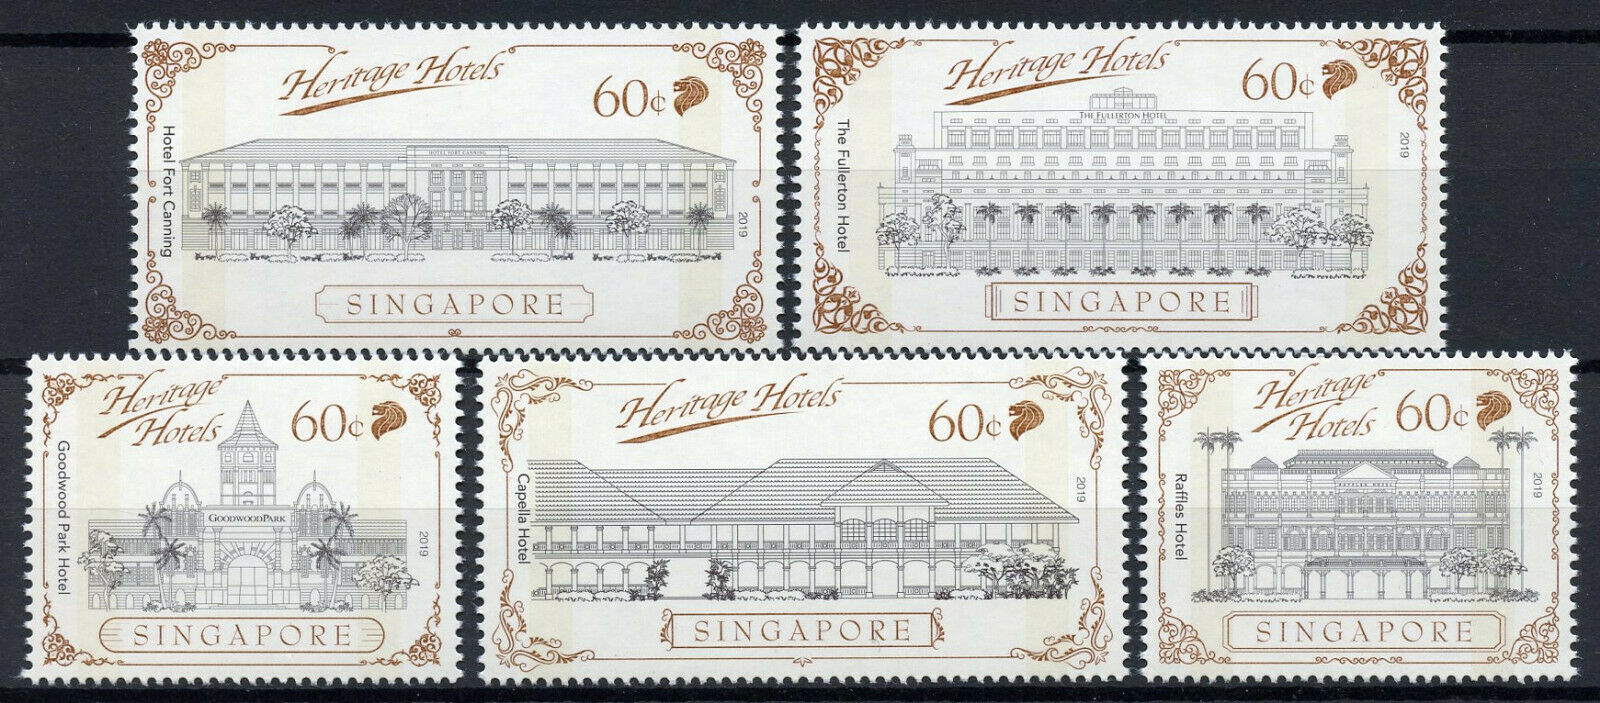 Singapore Architecture Stamps 2019 MNH Heritage Hotels Buildings 5v Set